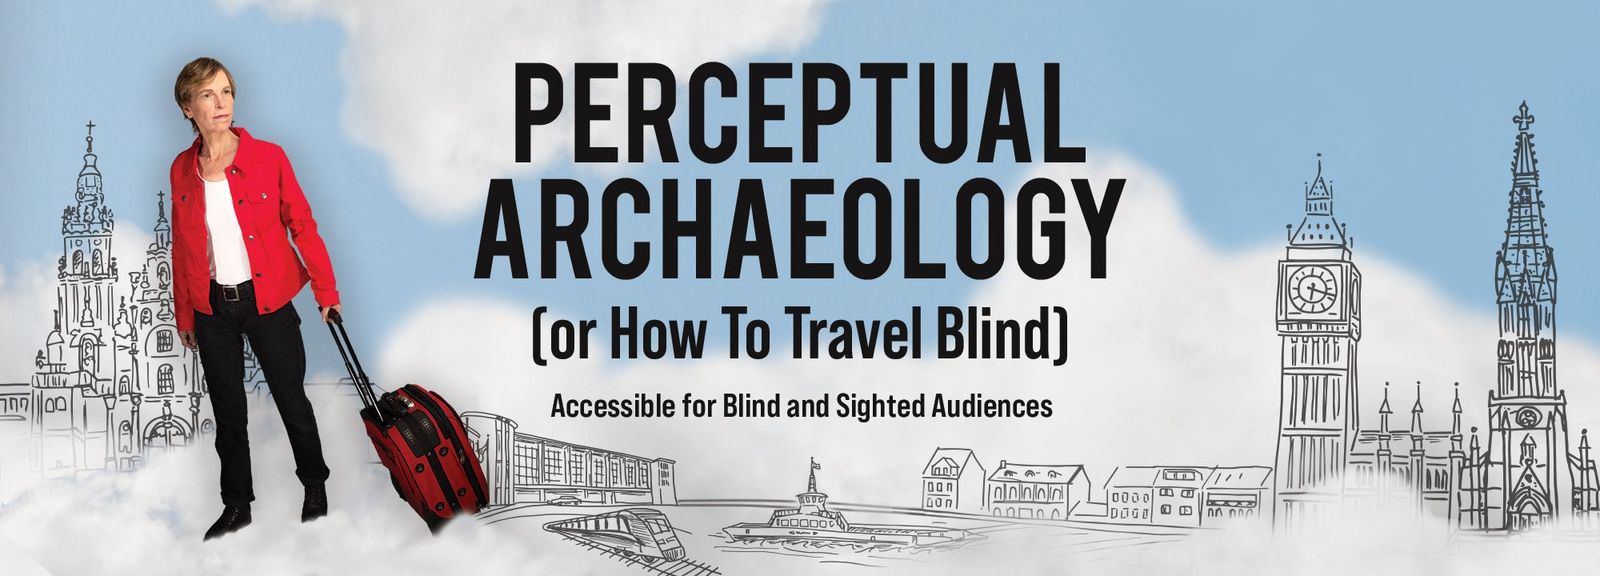 Promotional image for Perceptual Archaeology